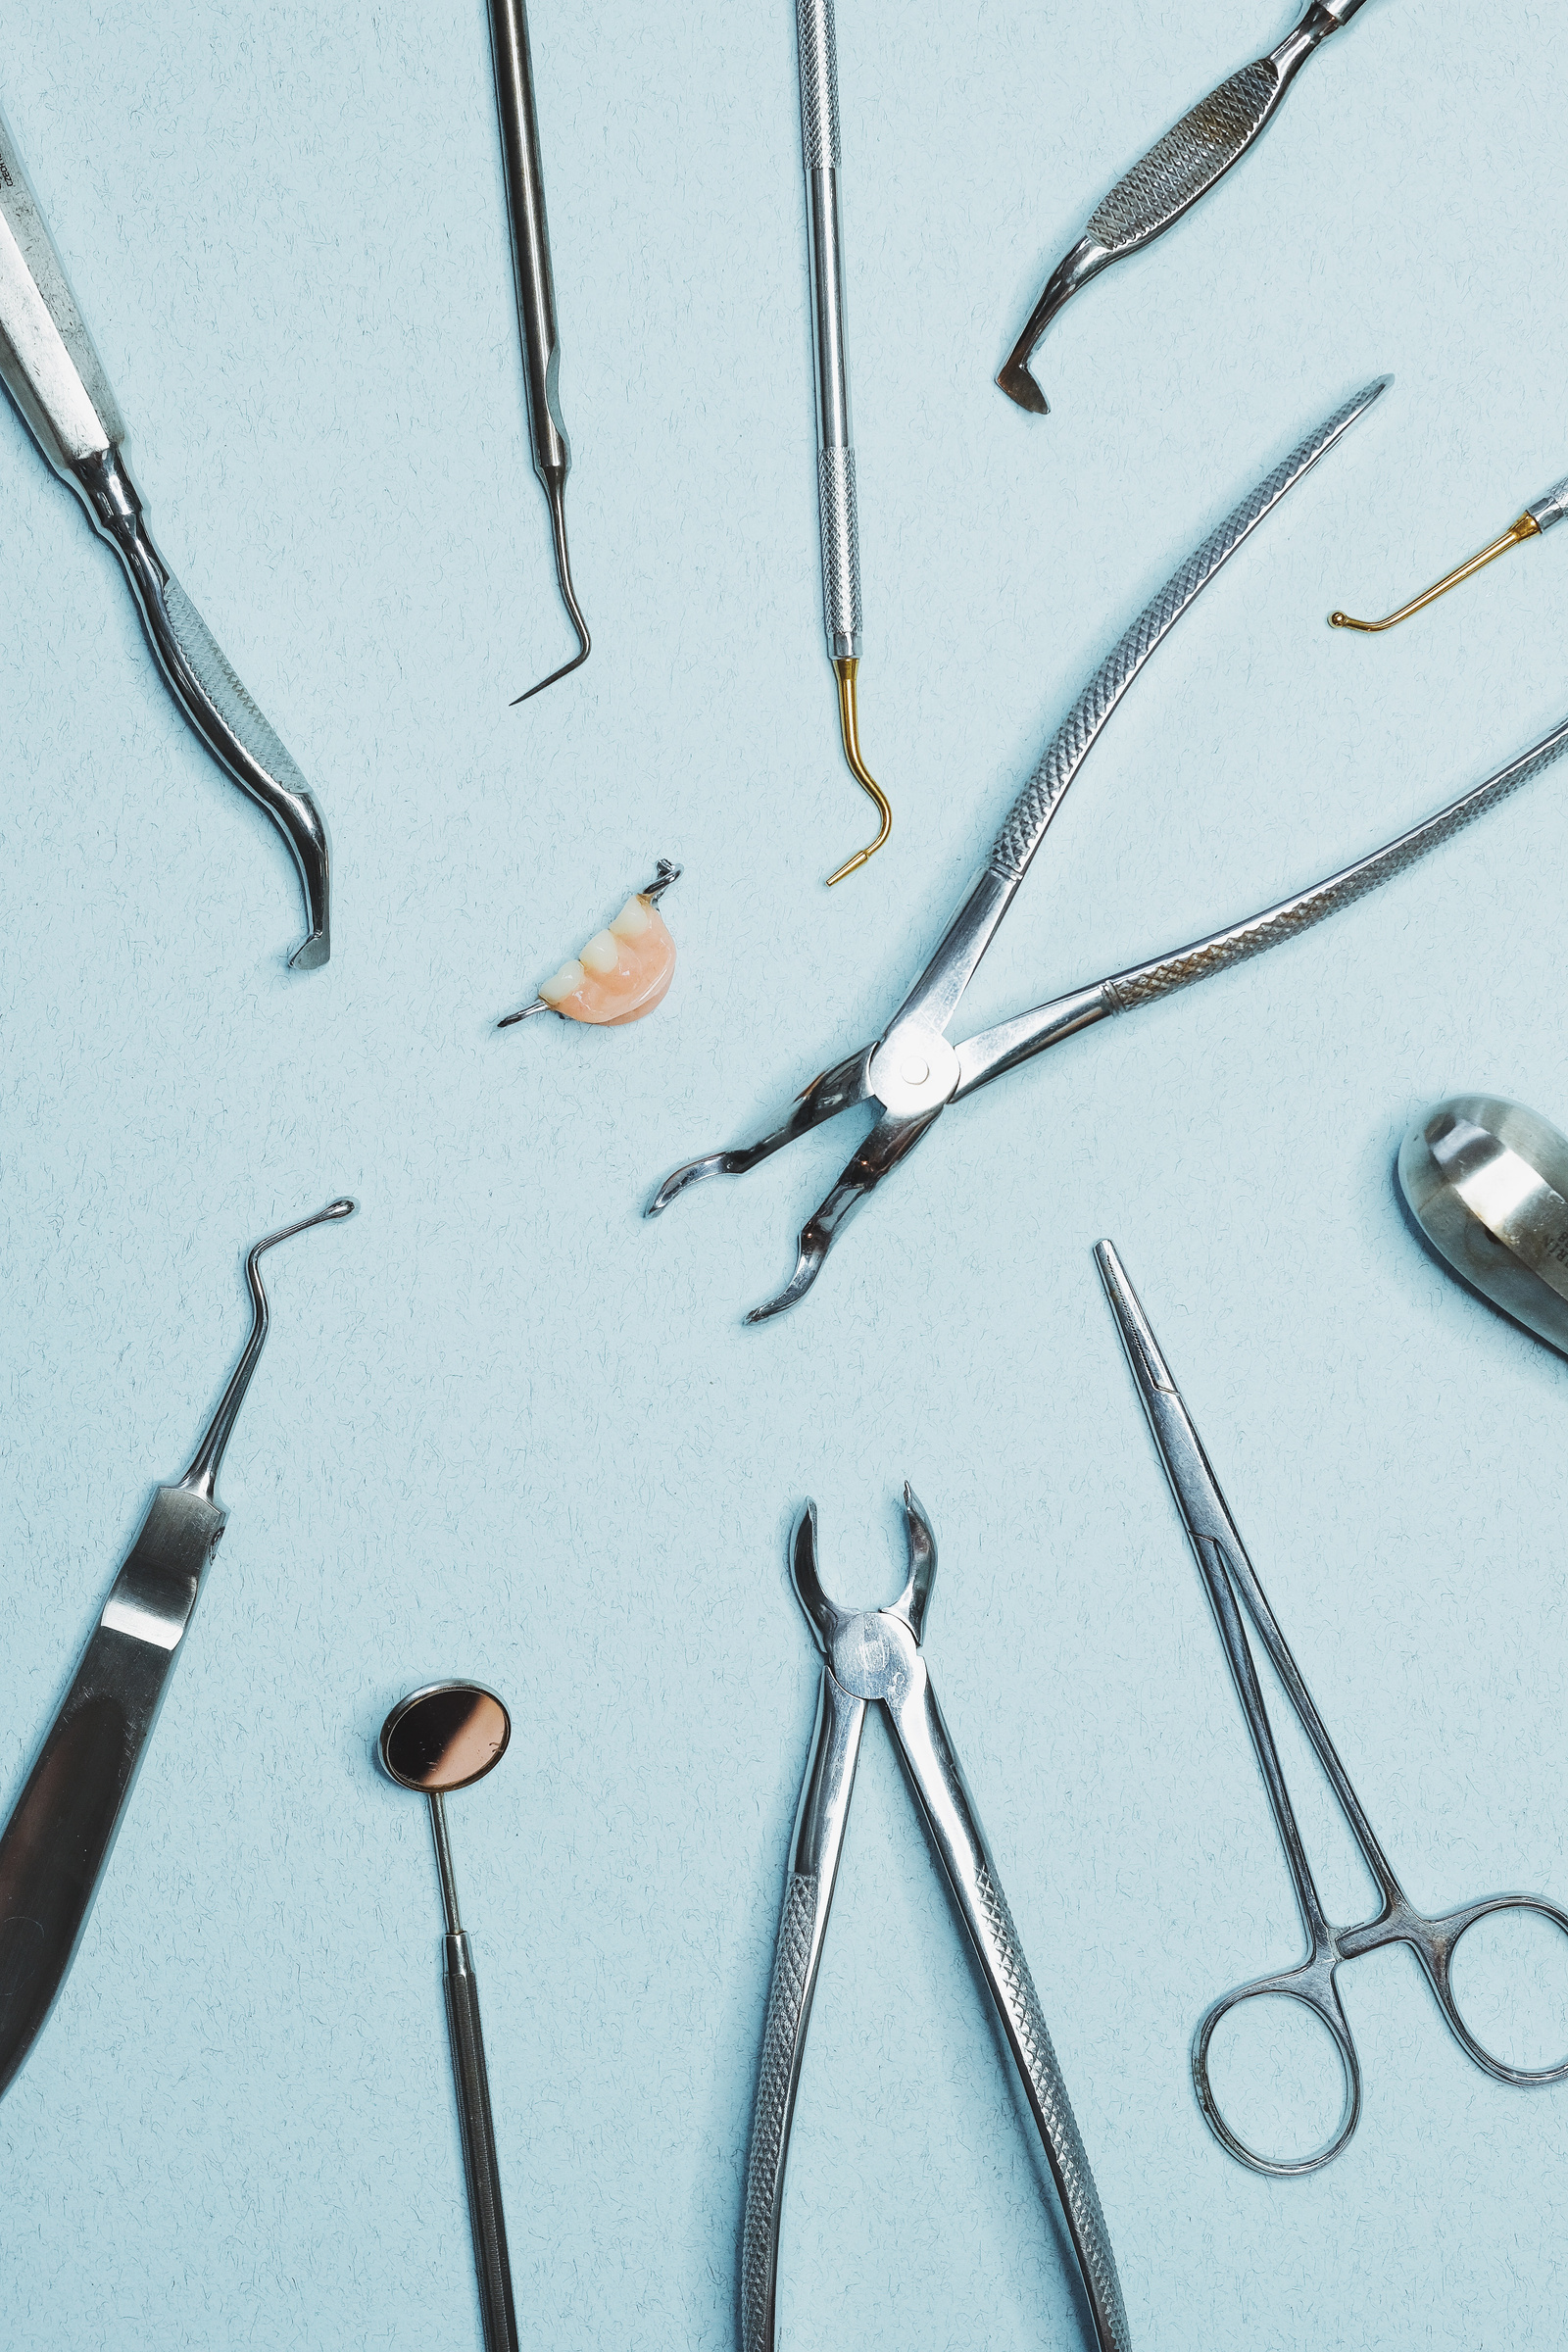 Stainless Dental Tools on Blue Surface